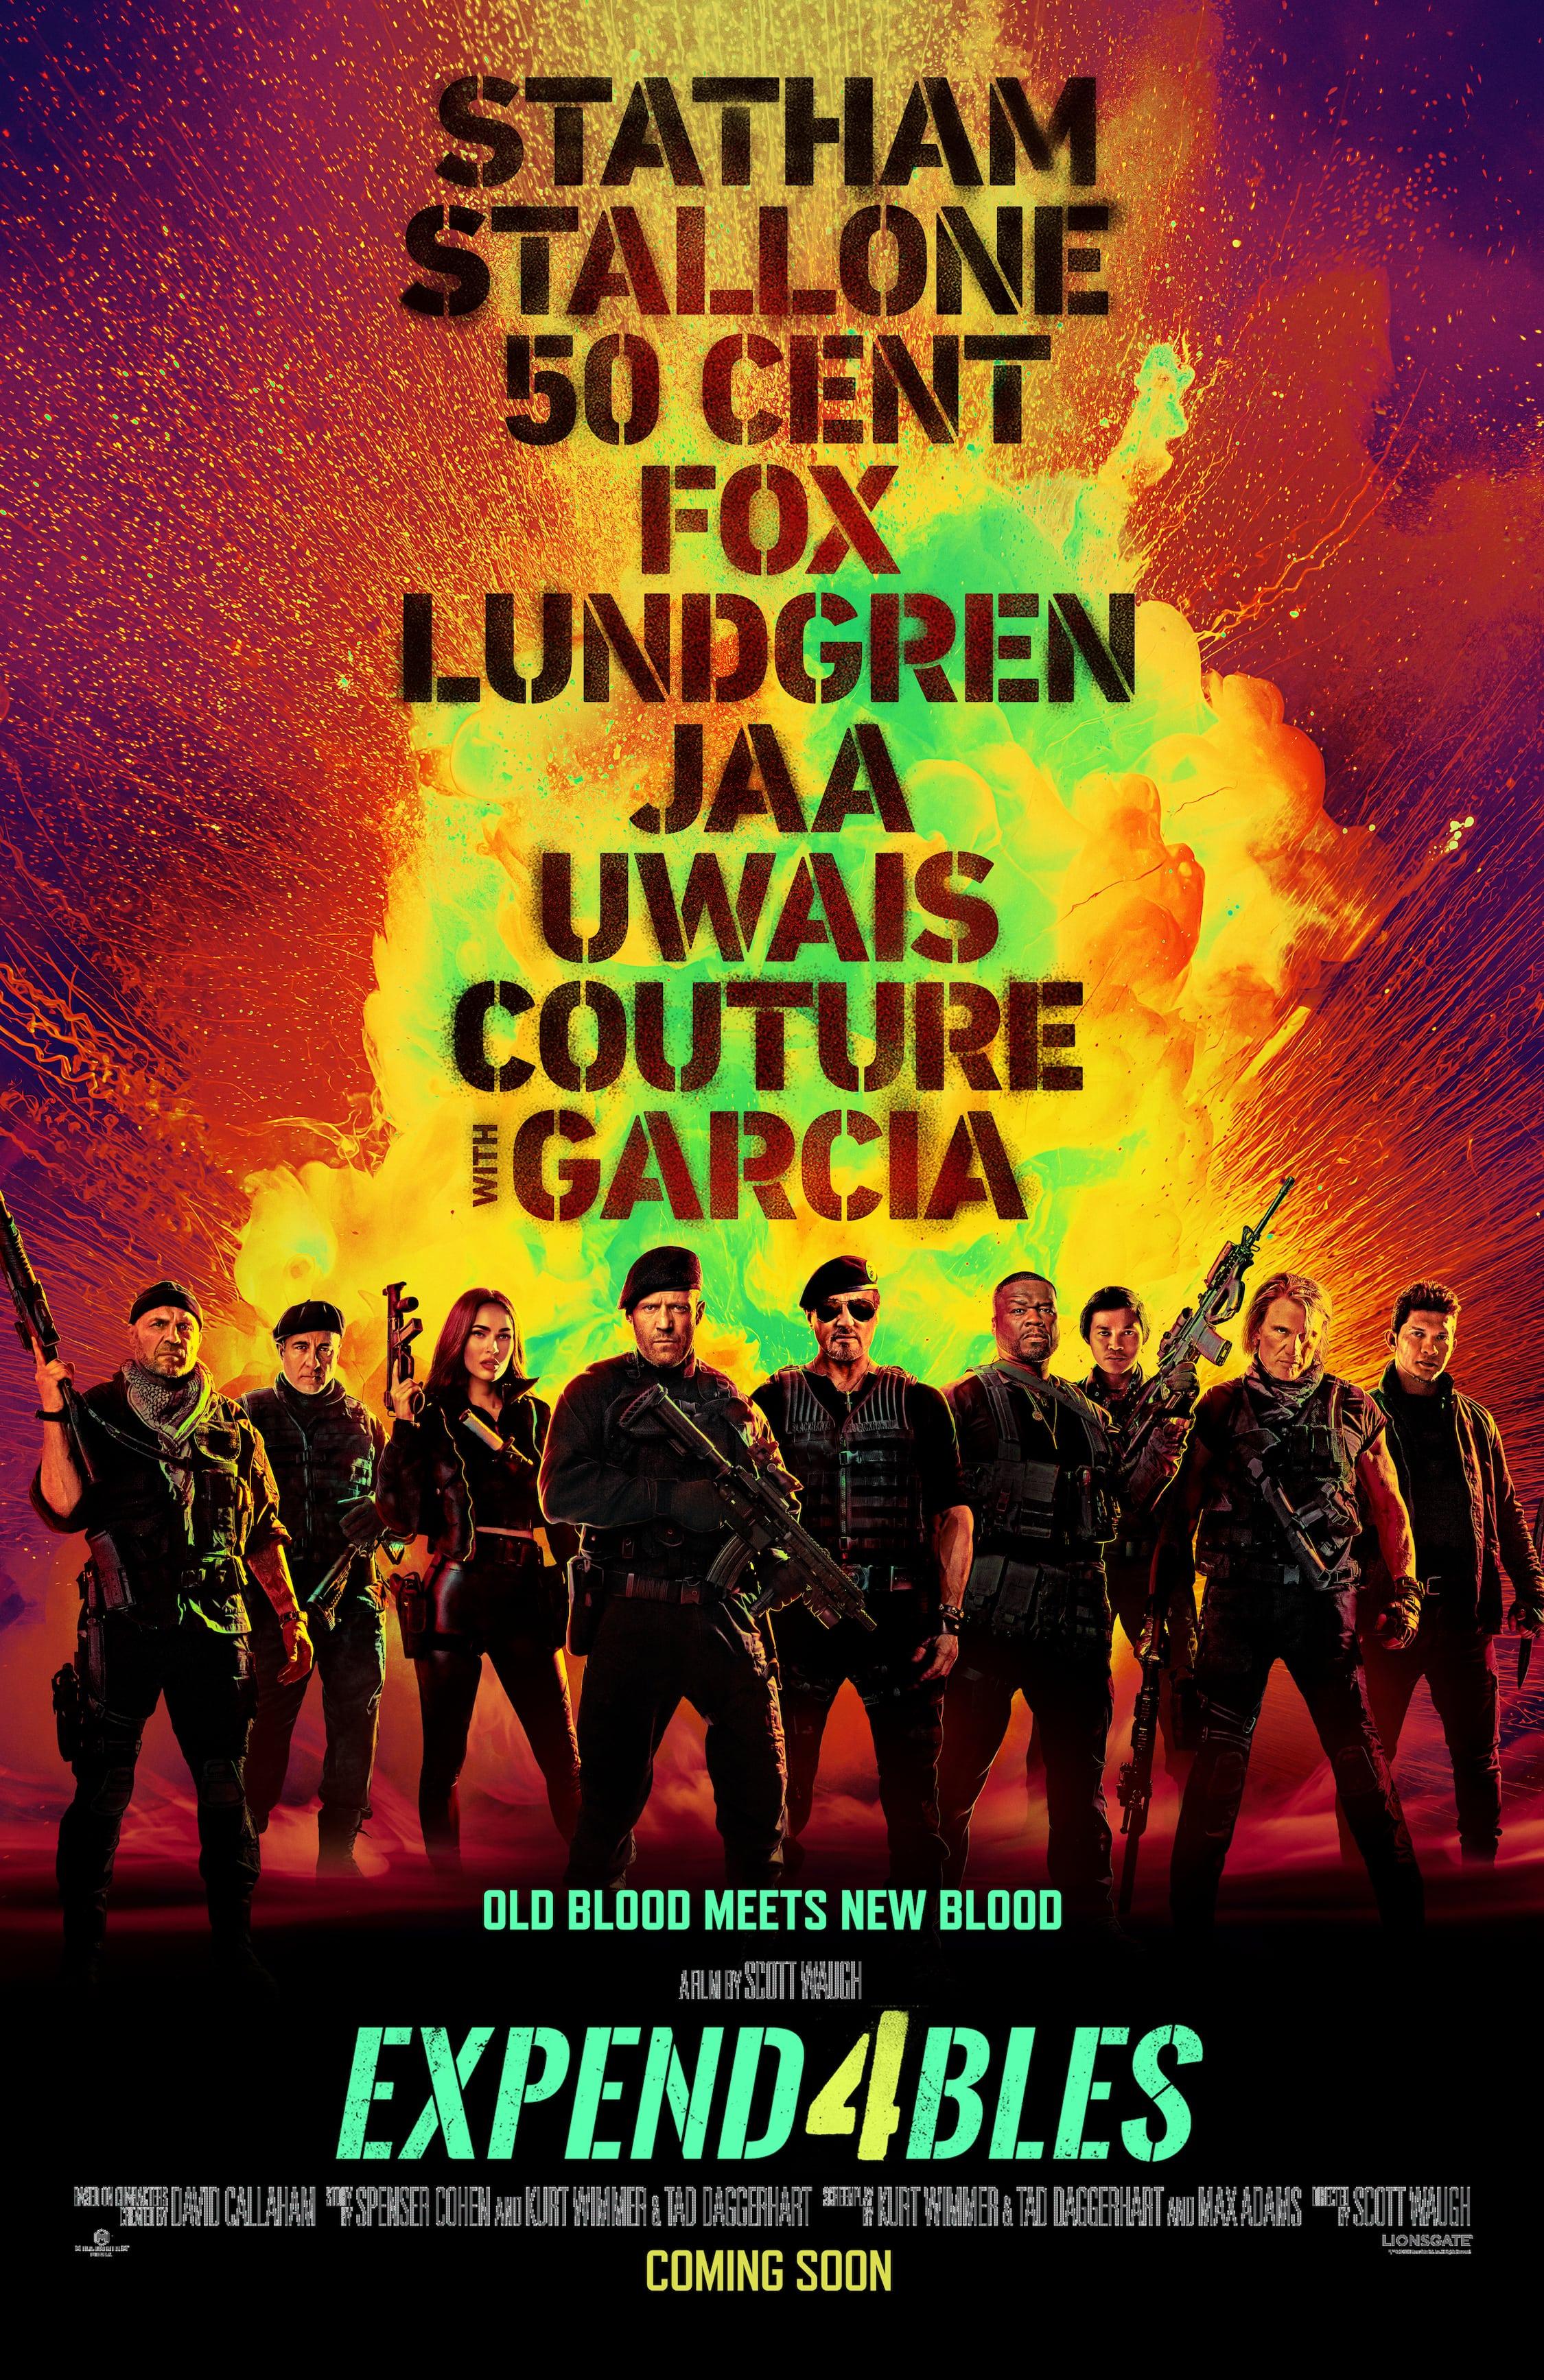 Expendables 4 (September 22): Expect a high-octane cinematic experience as the 